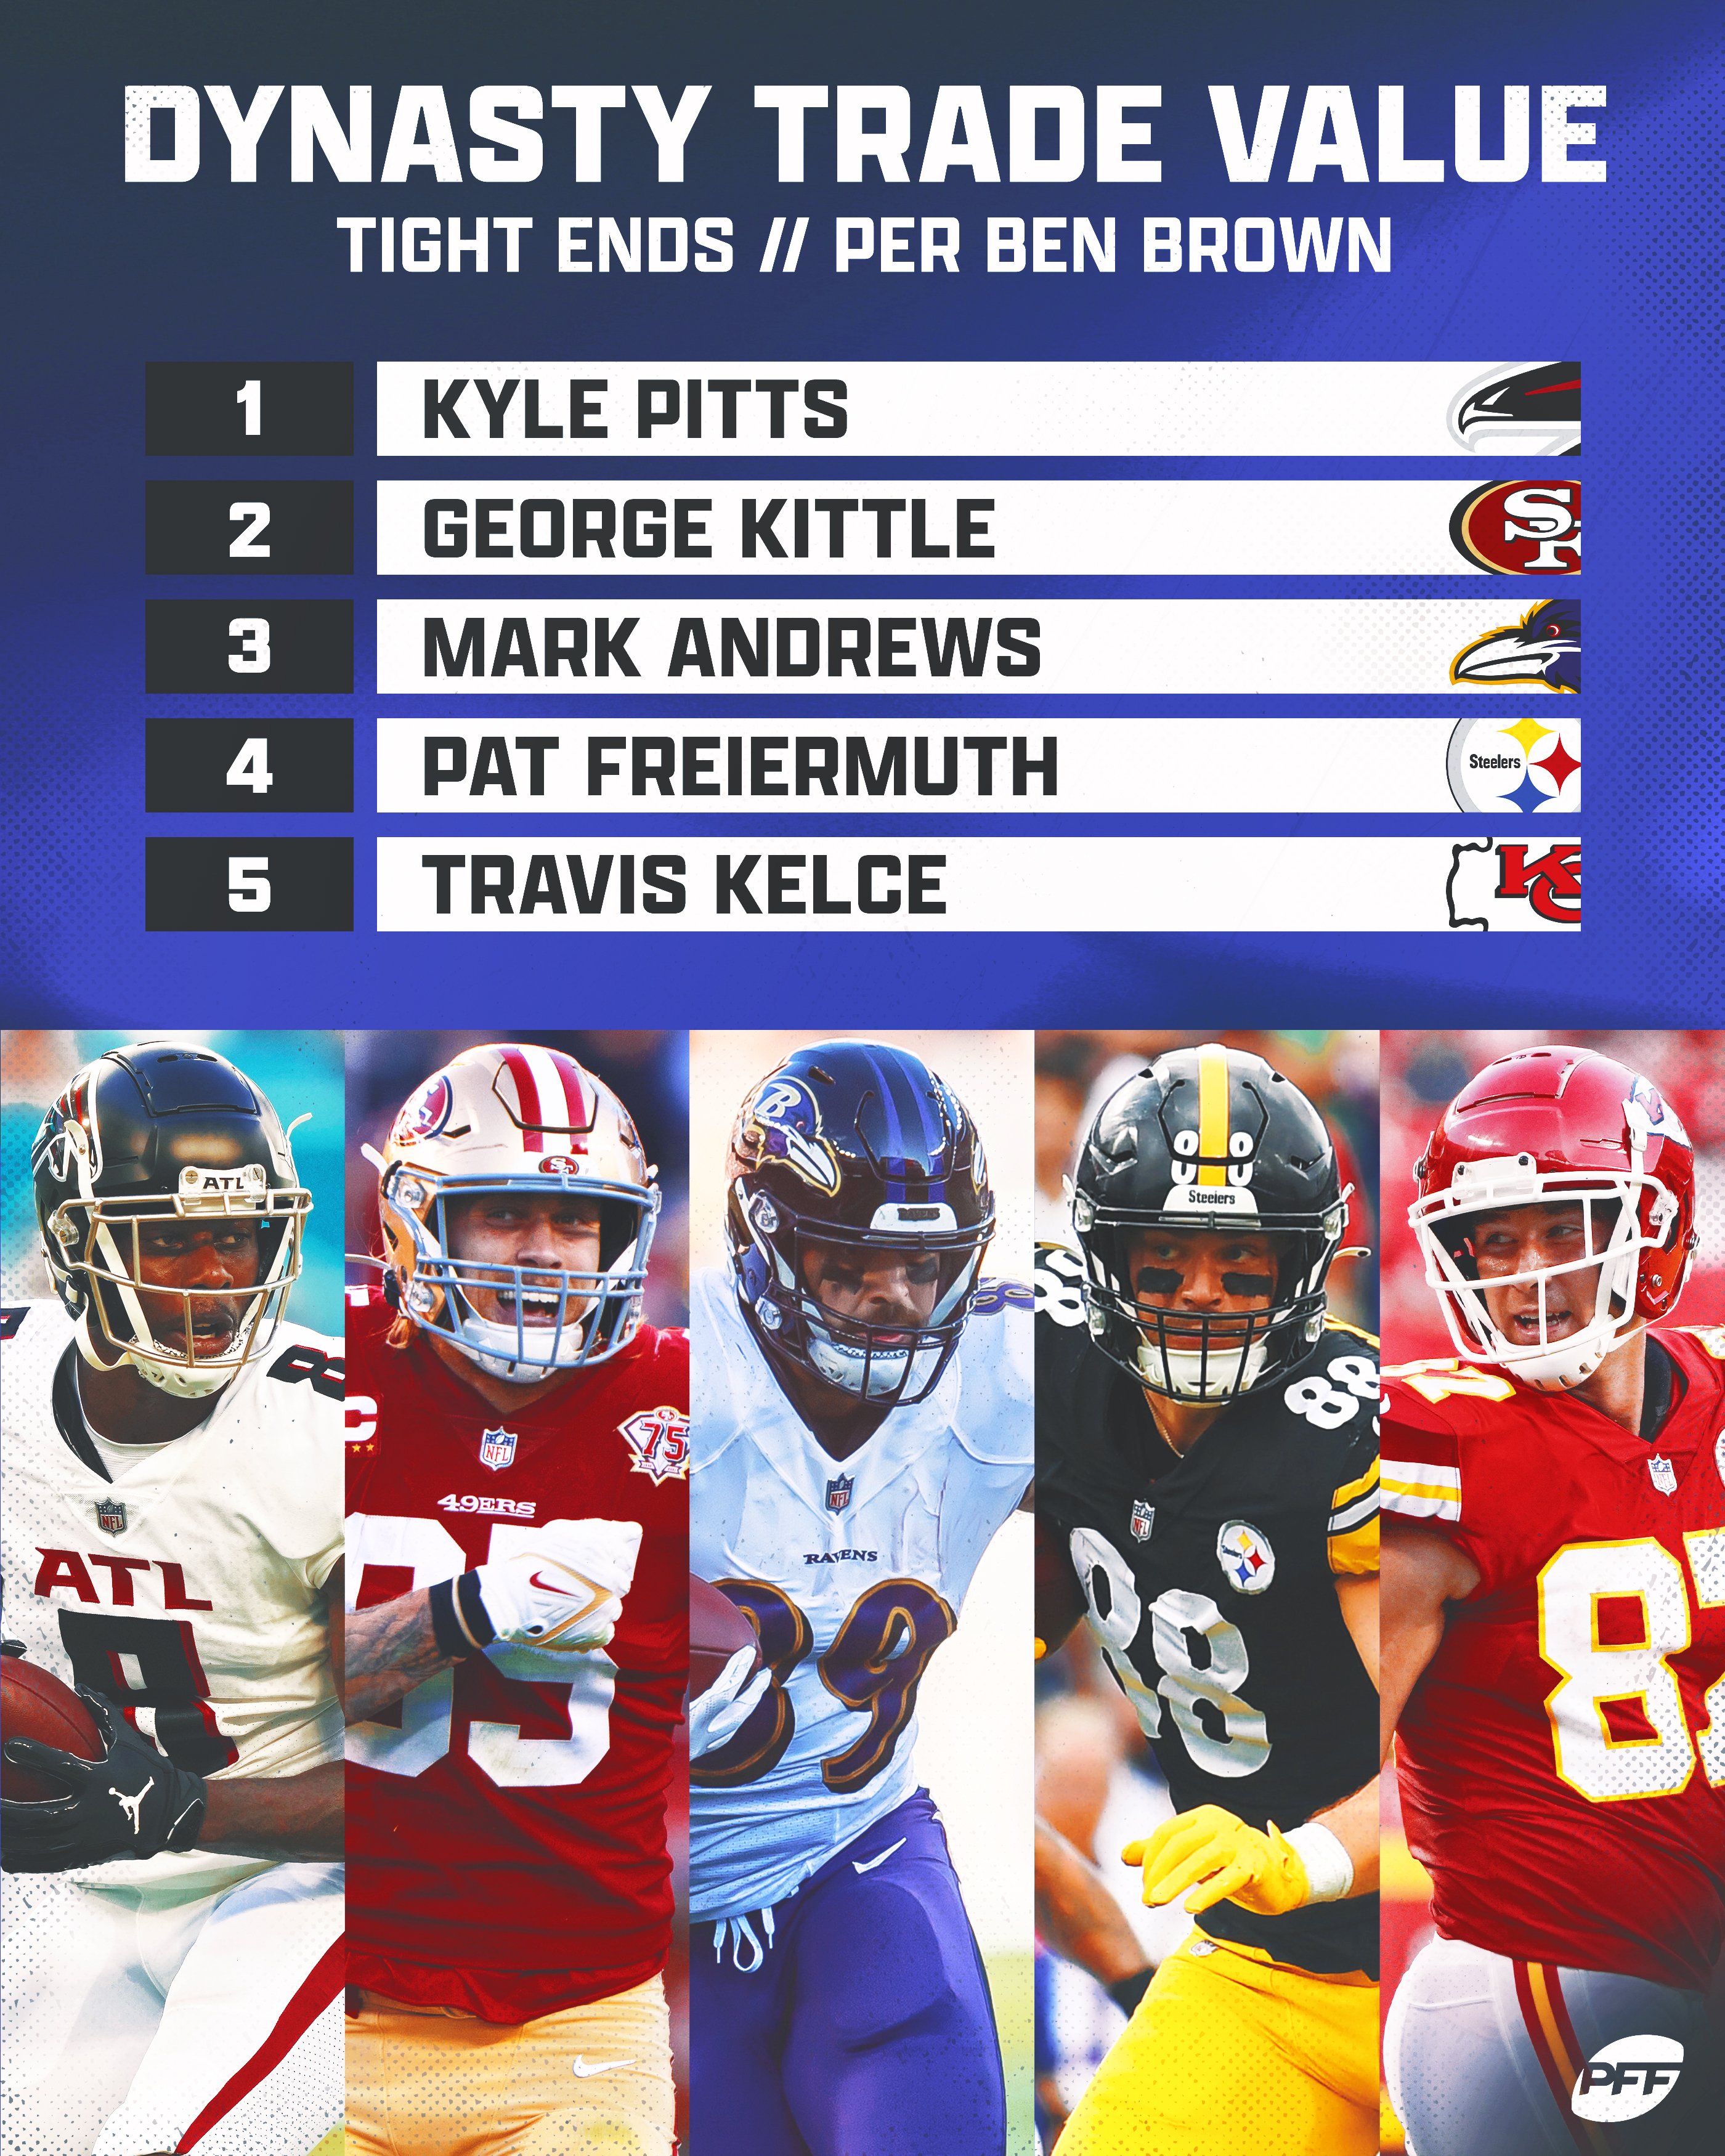 top 5 tight ends